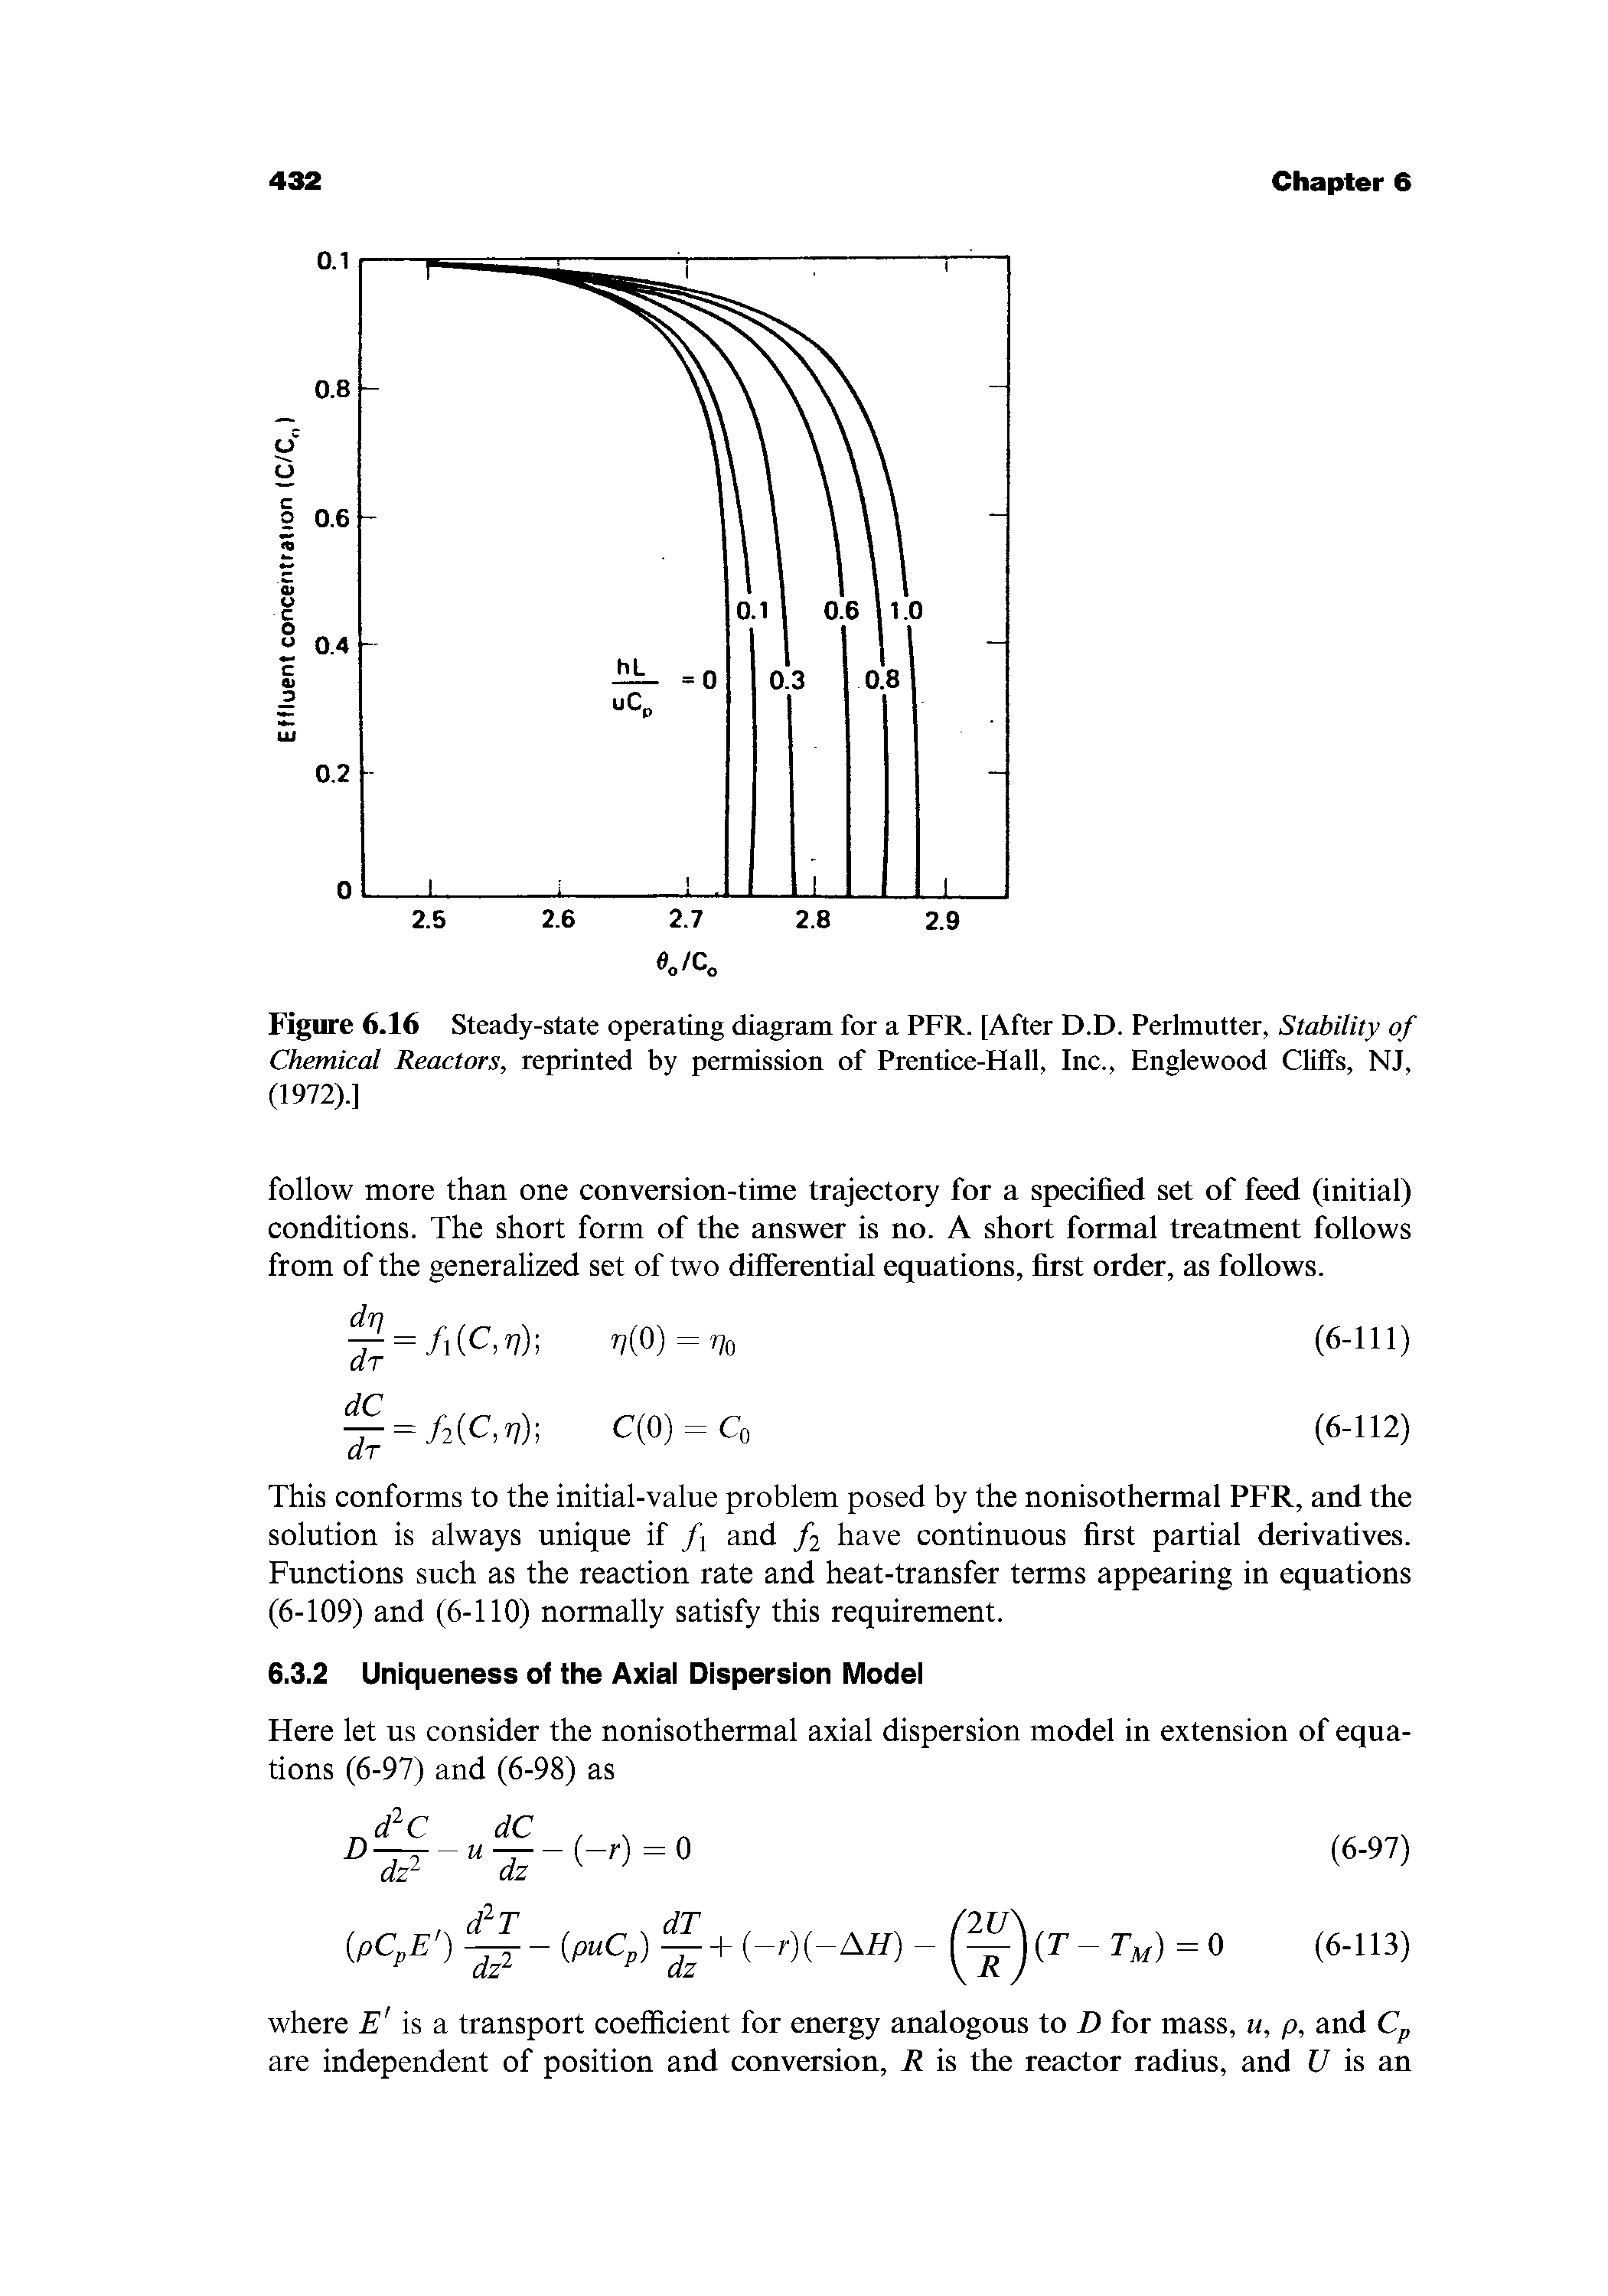 Figure 6.16 Steady-state operating diagram for a PFR. [After D.D. Perlmutter, Stability of Chemical Reactors, reprinted by permission of Prentice-Hall, Inc., Englewood Cliffs, NJ, (1972).]...